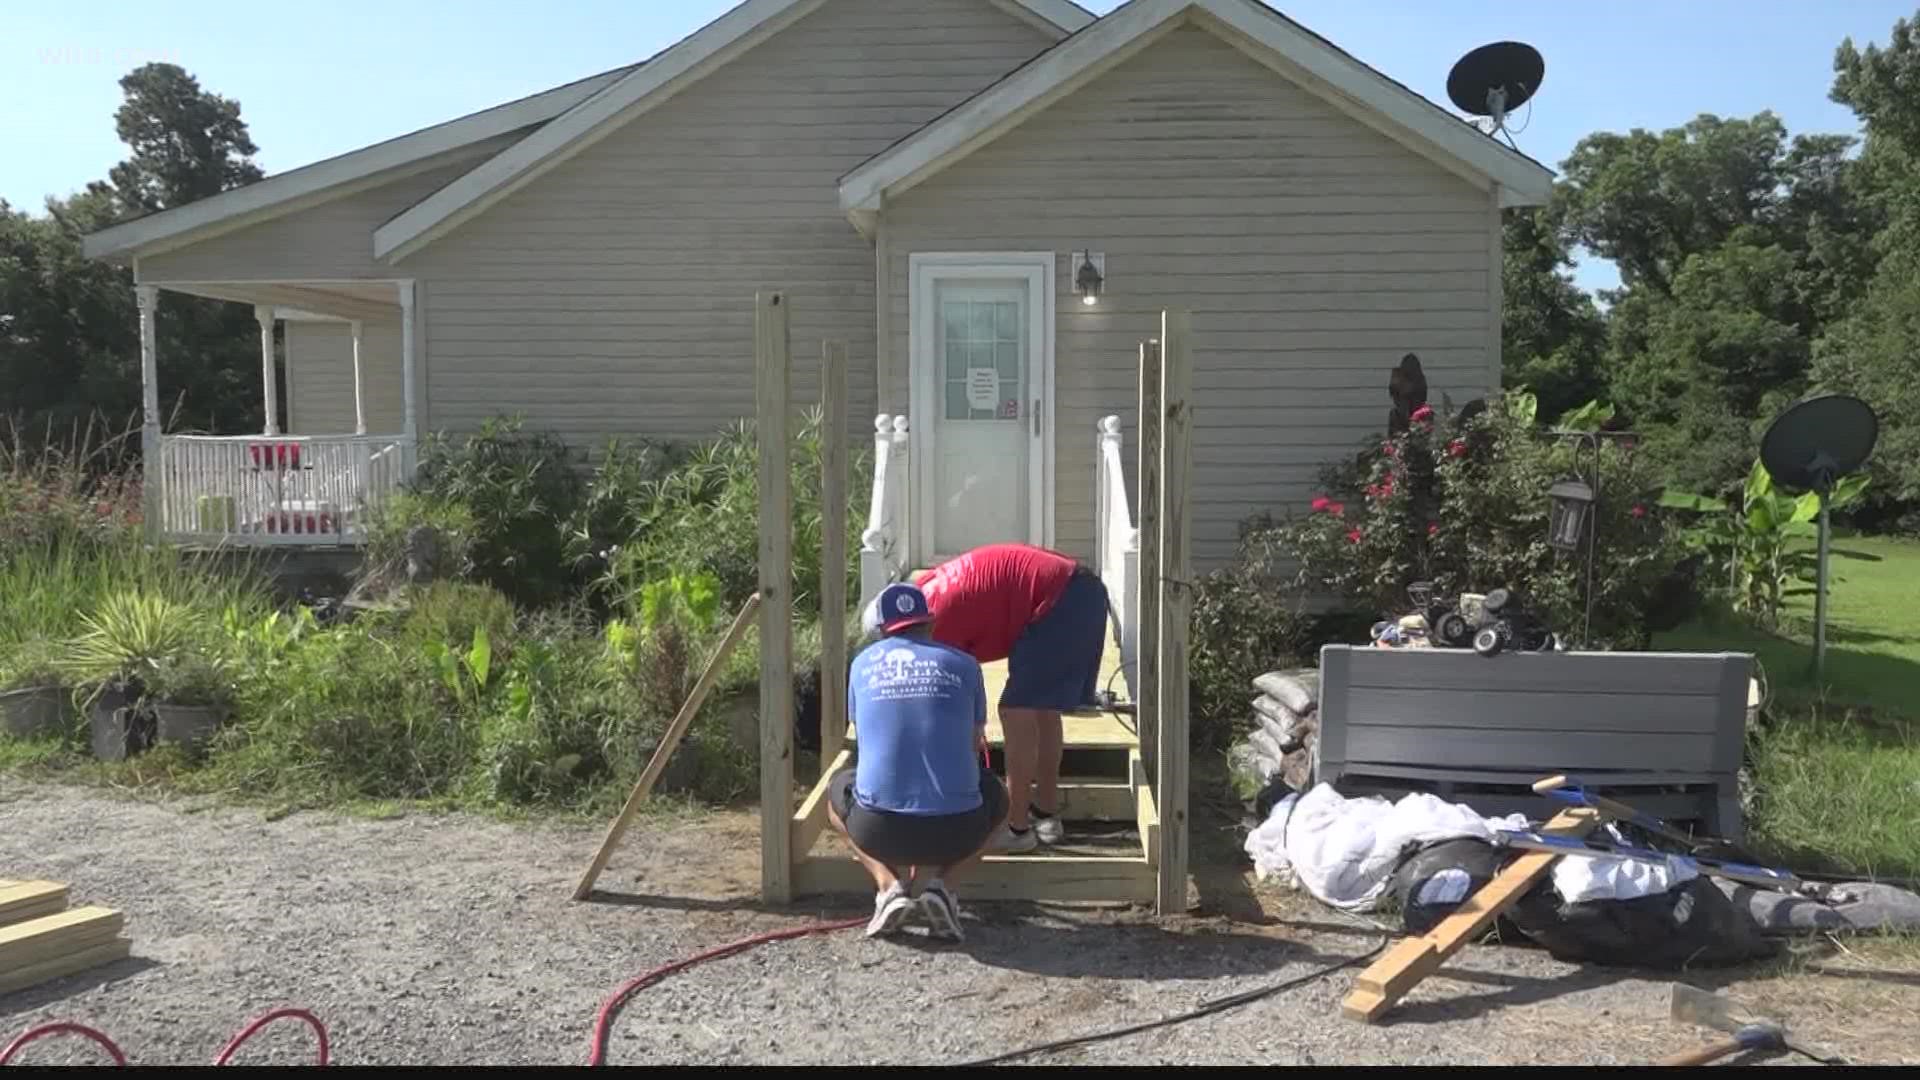 Carpenters for Christ helping those with wheelchair ramps in Orangeburg.